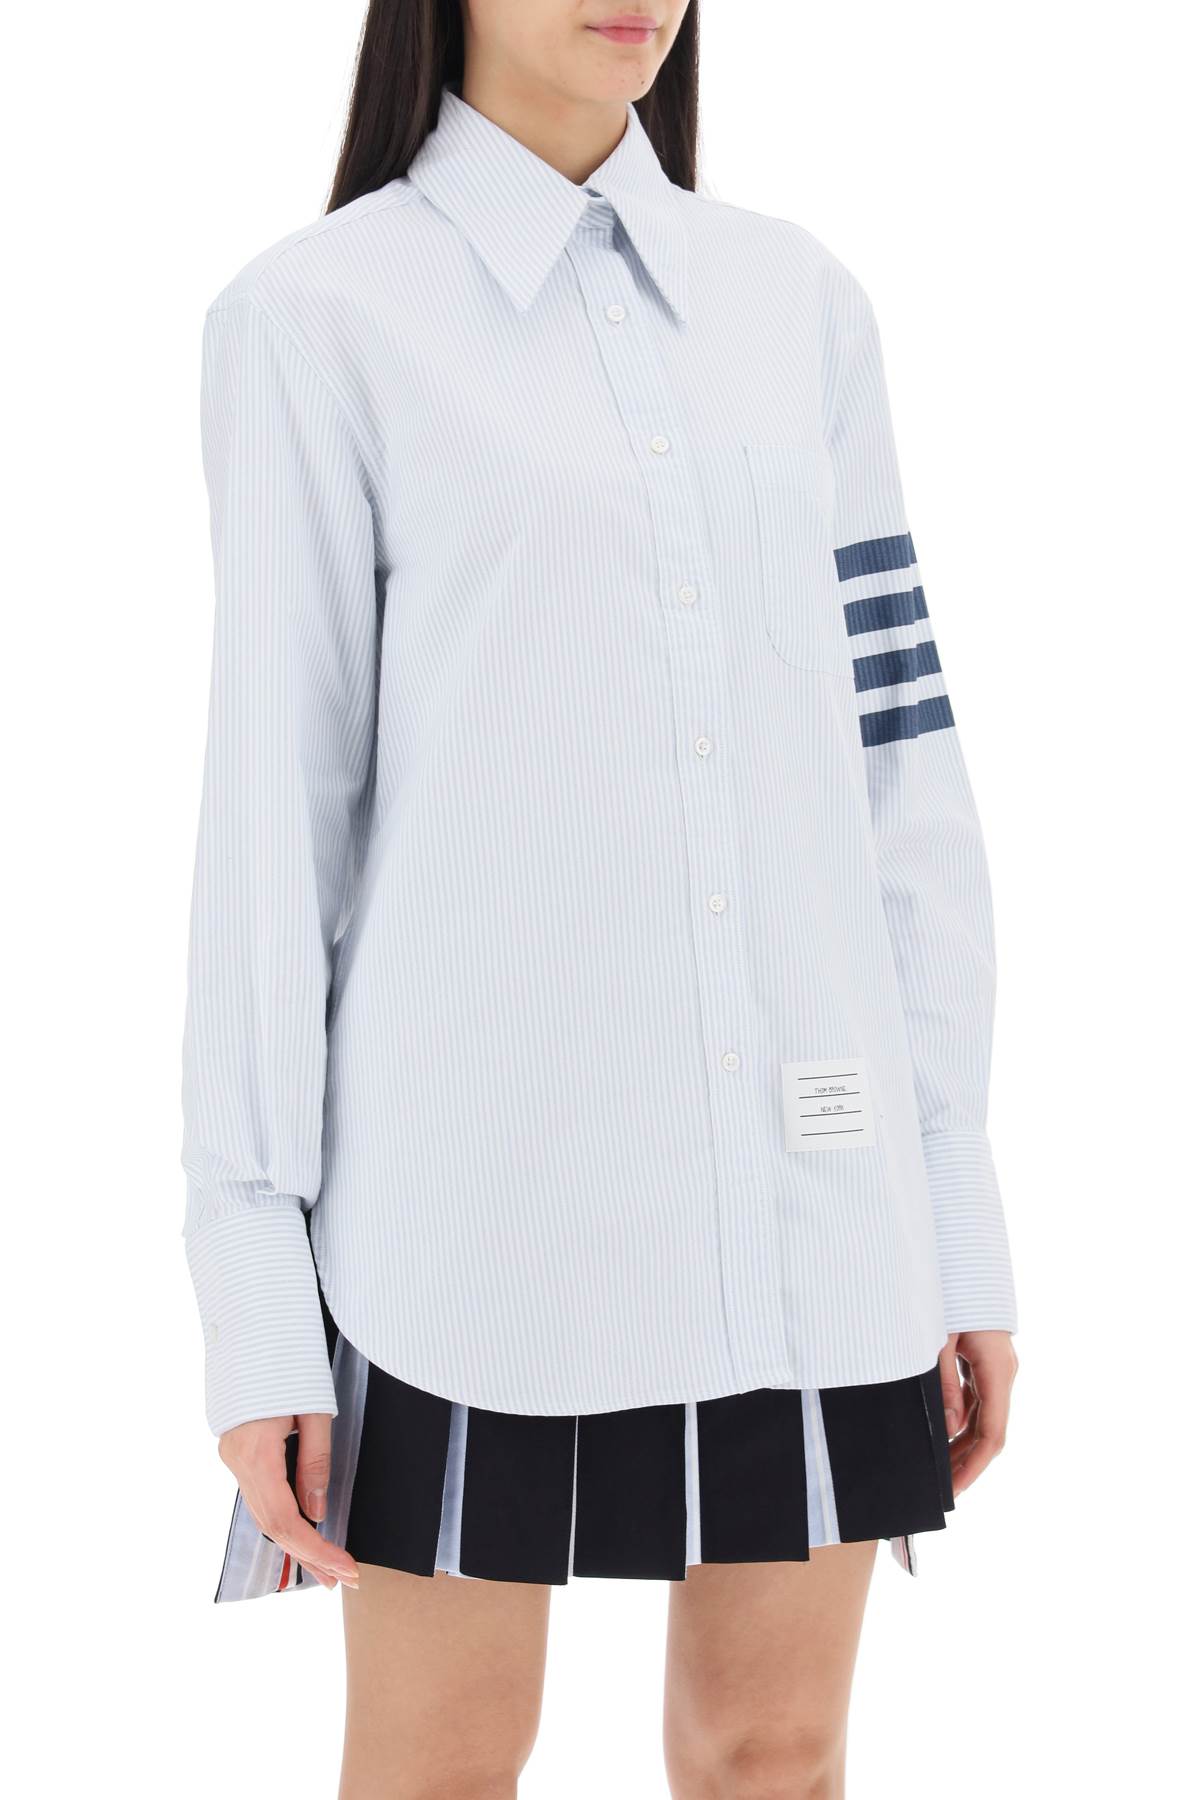 Thom Browne Striped Oxford Shirt With Pointed Collar Women - Walmart.com